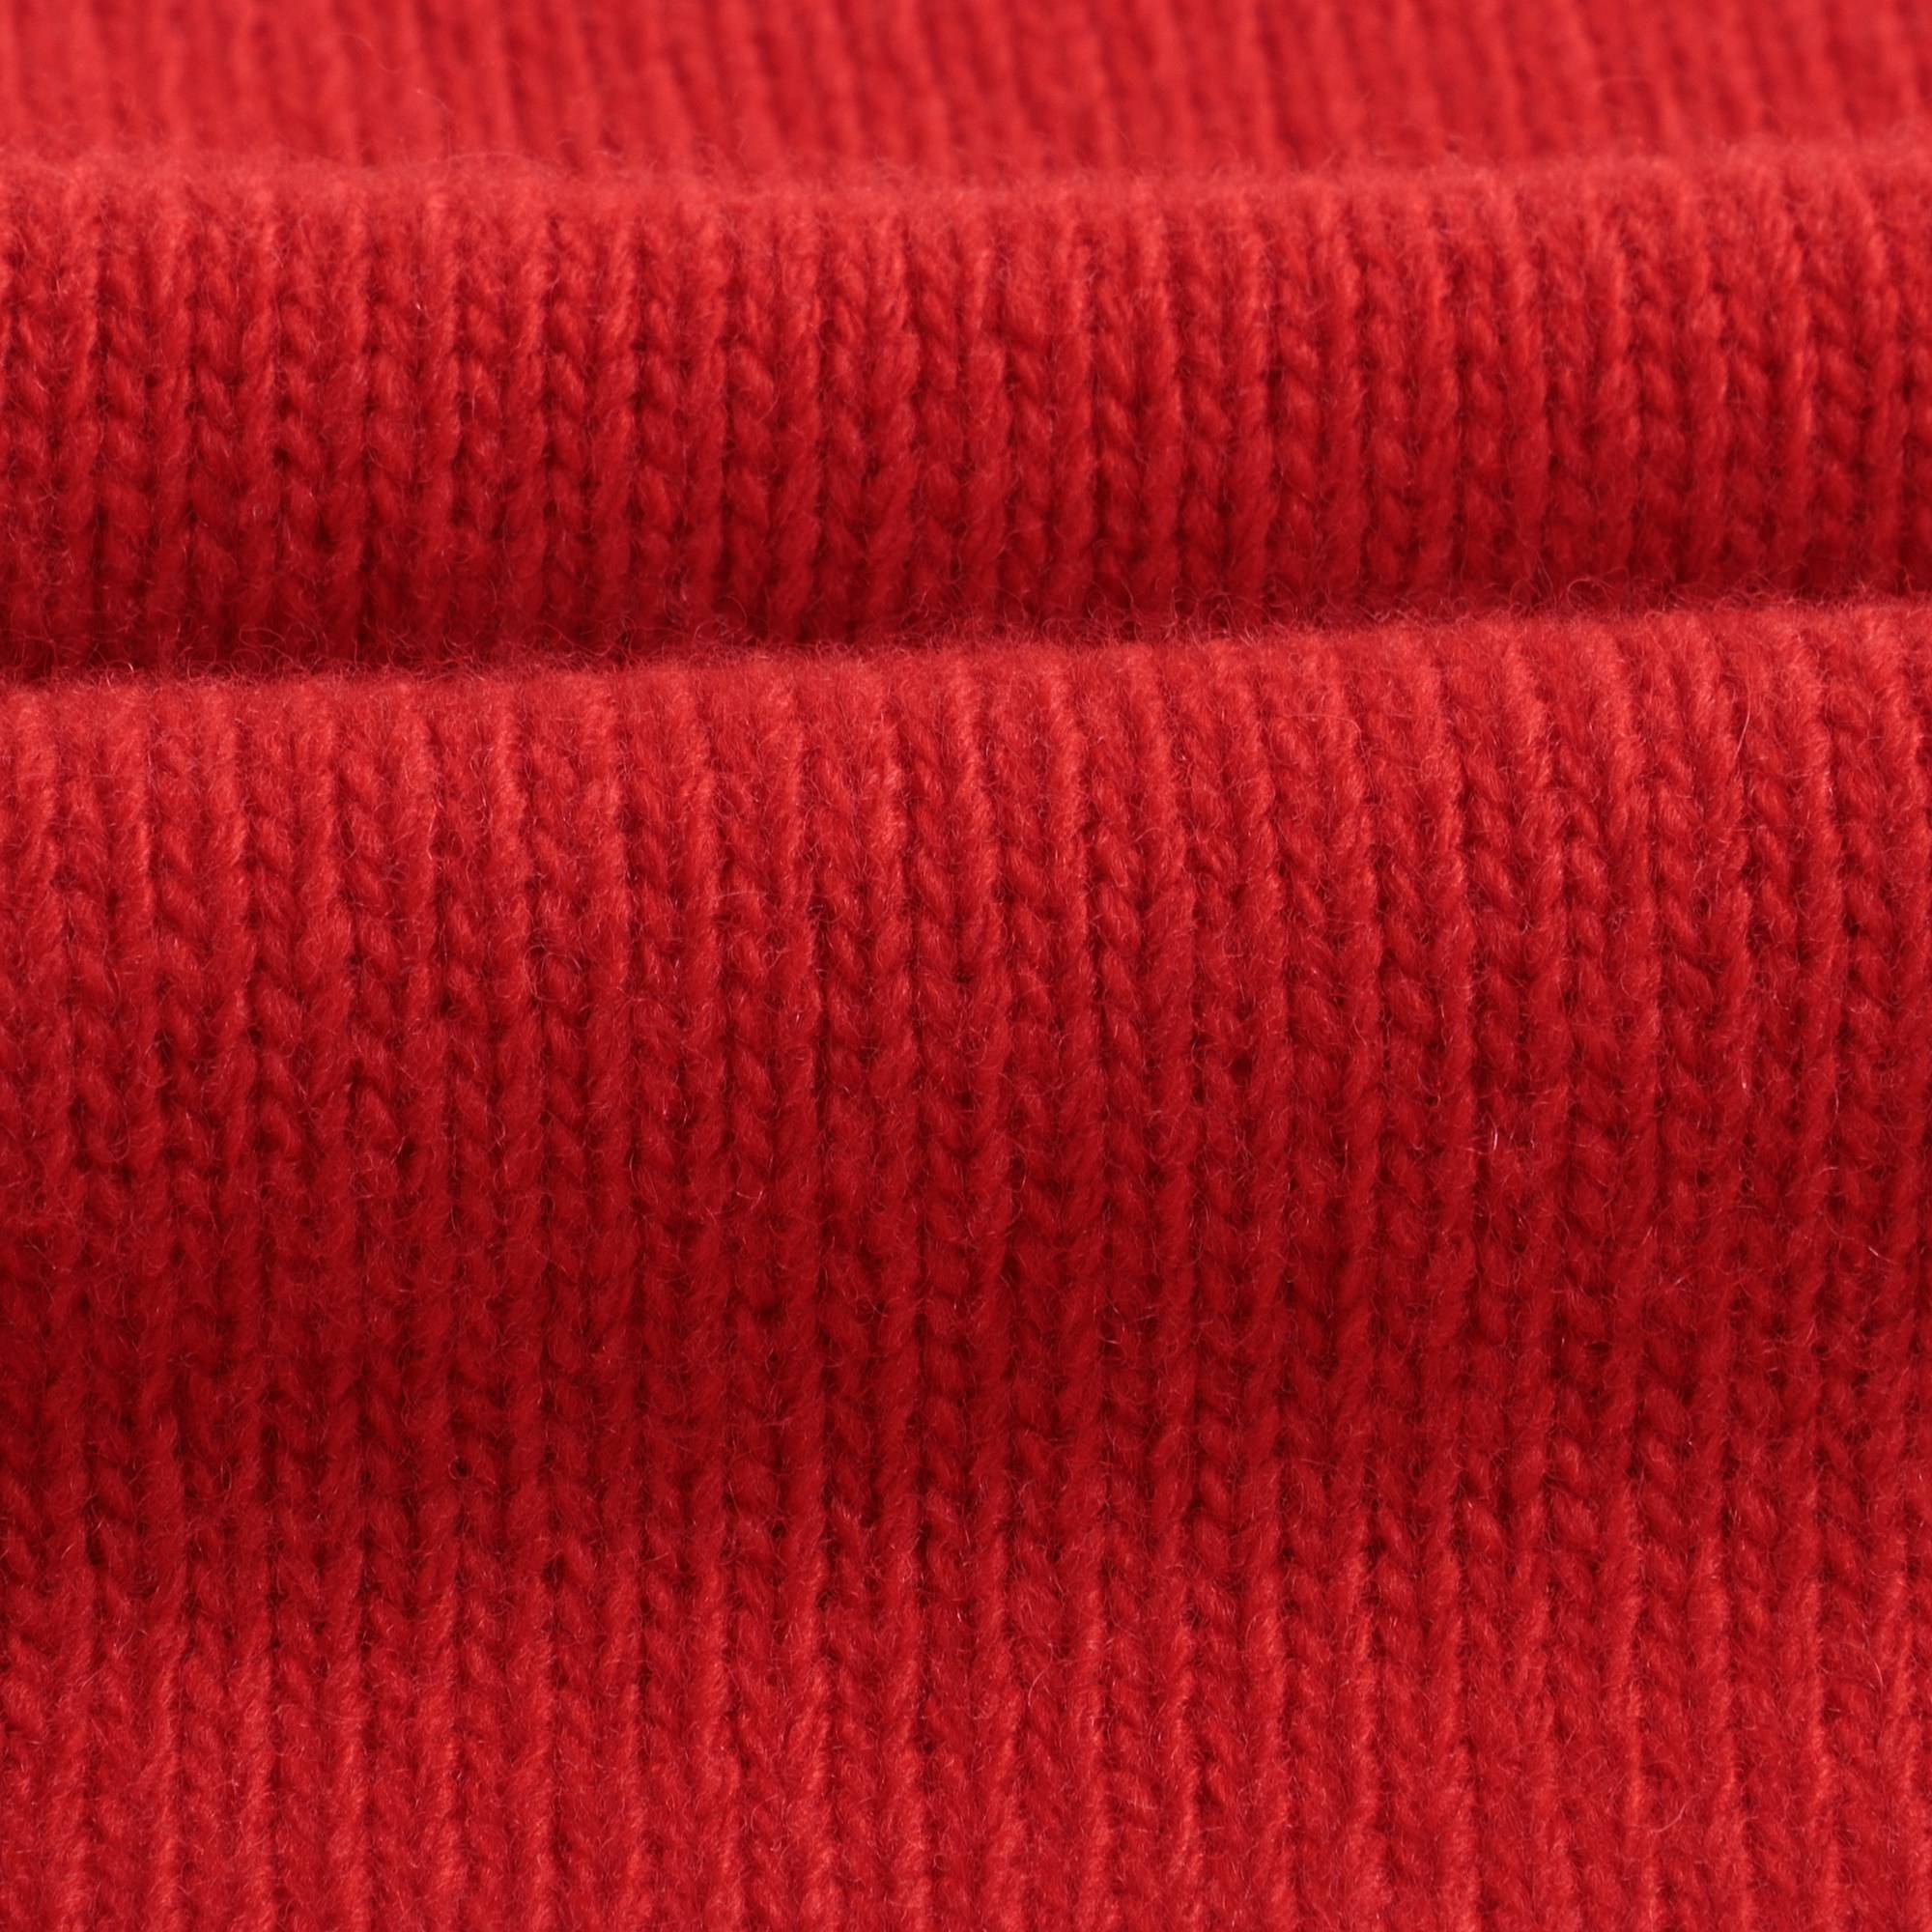 Boys Red V-neck Wool Sweater